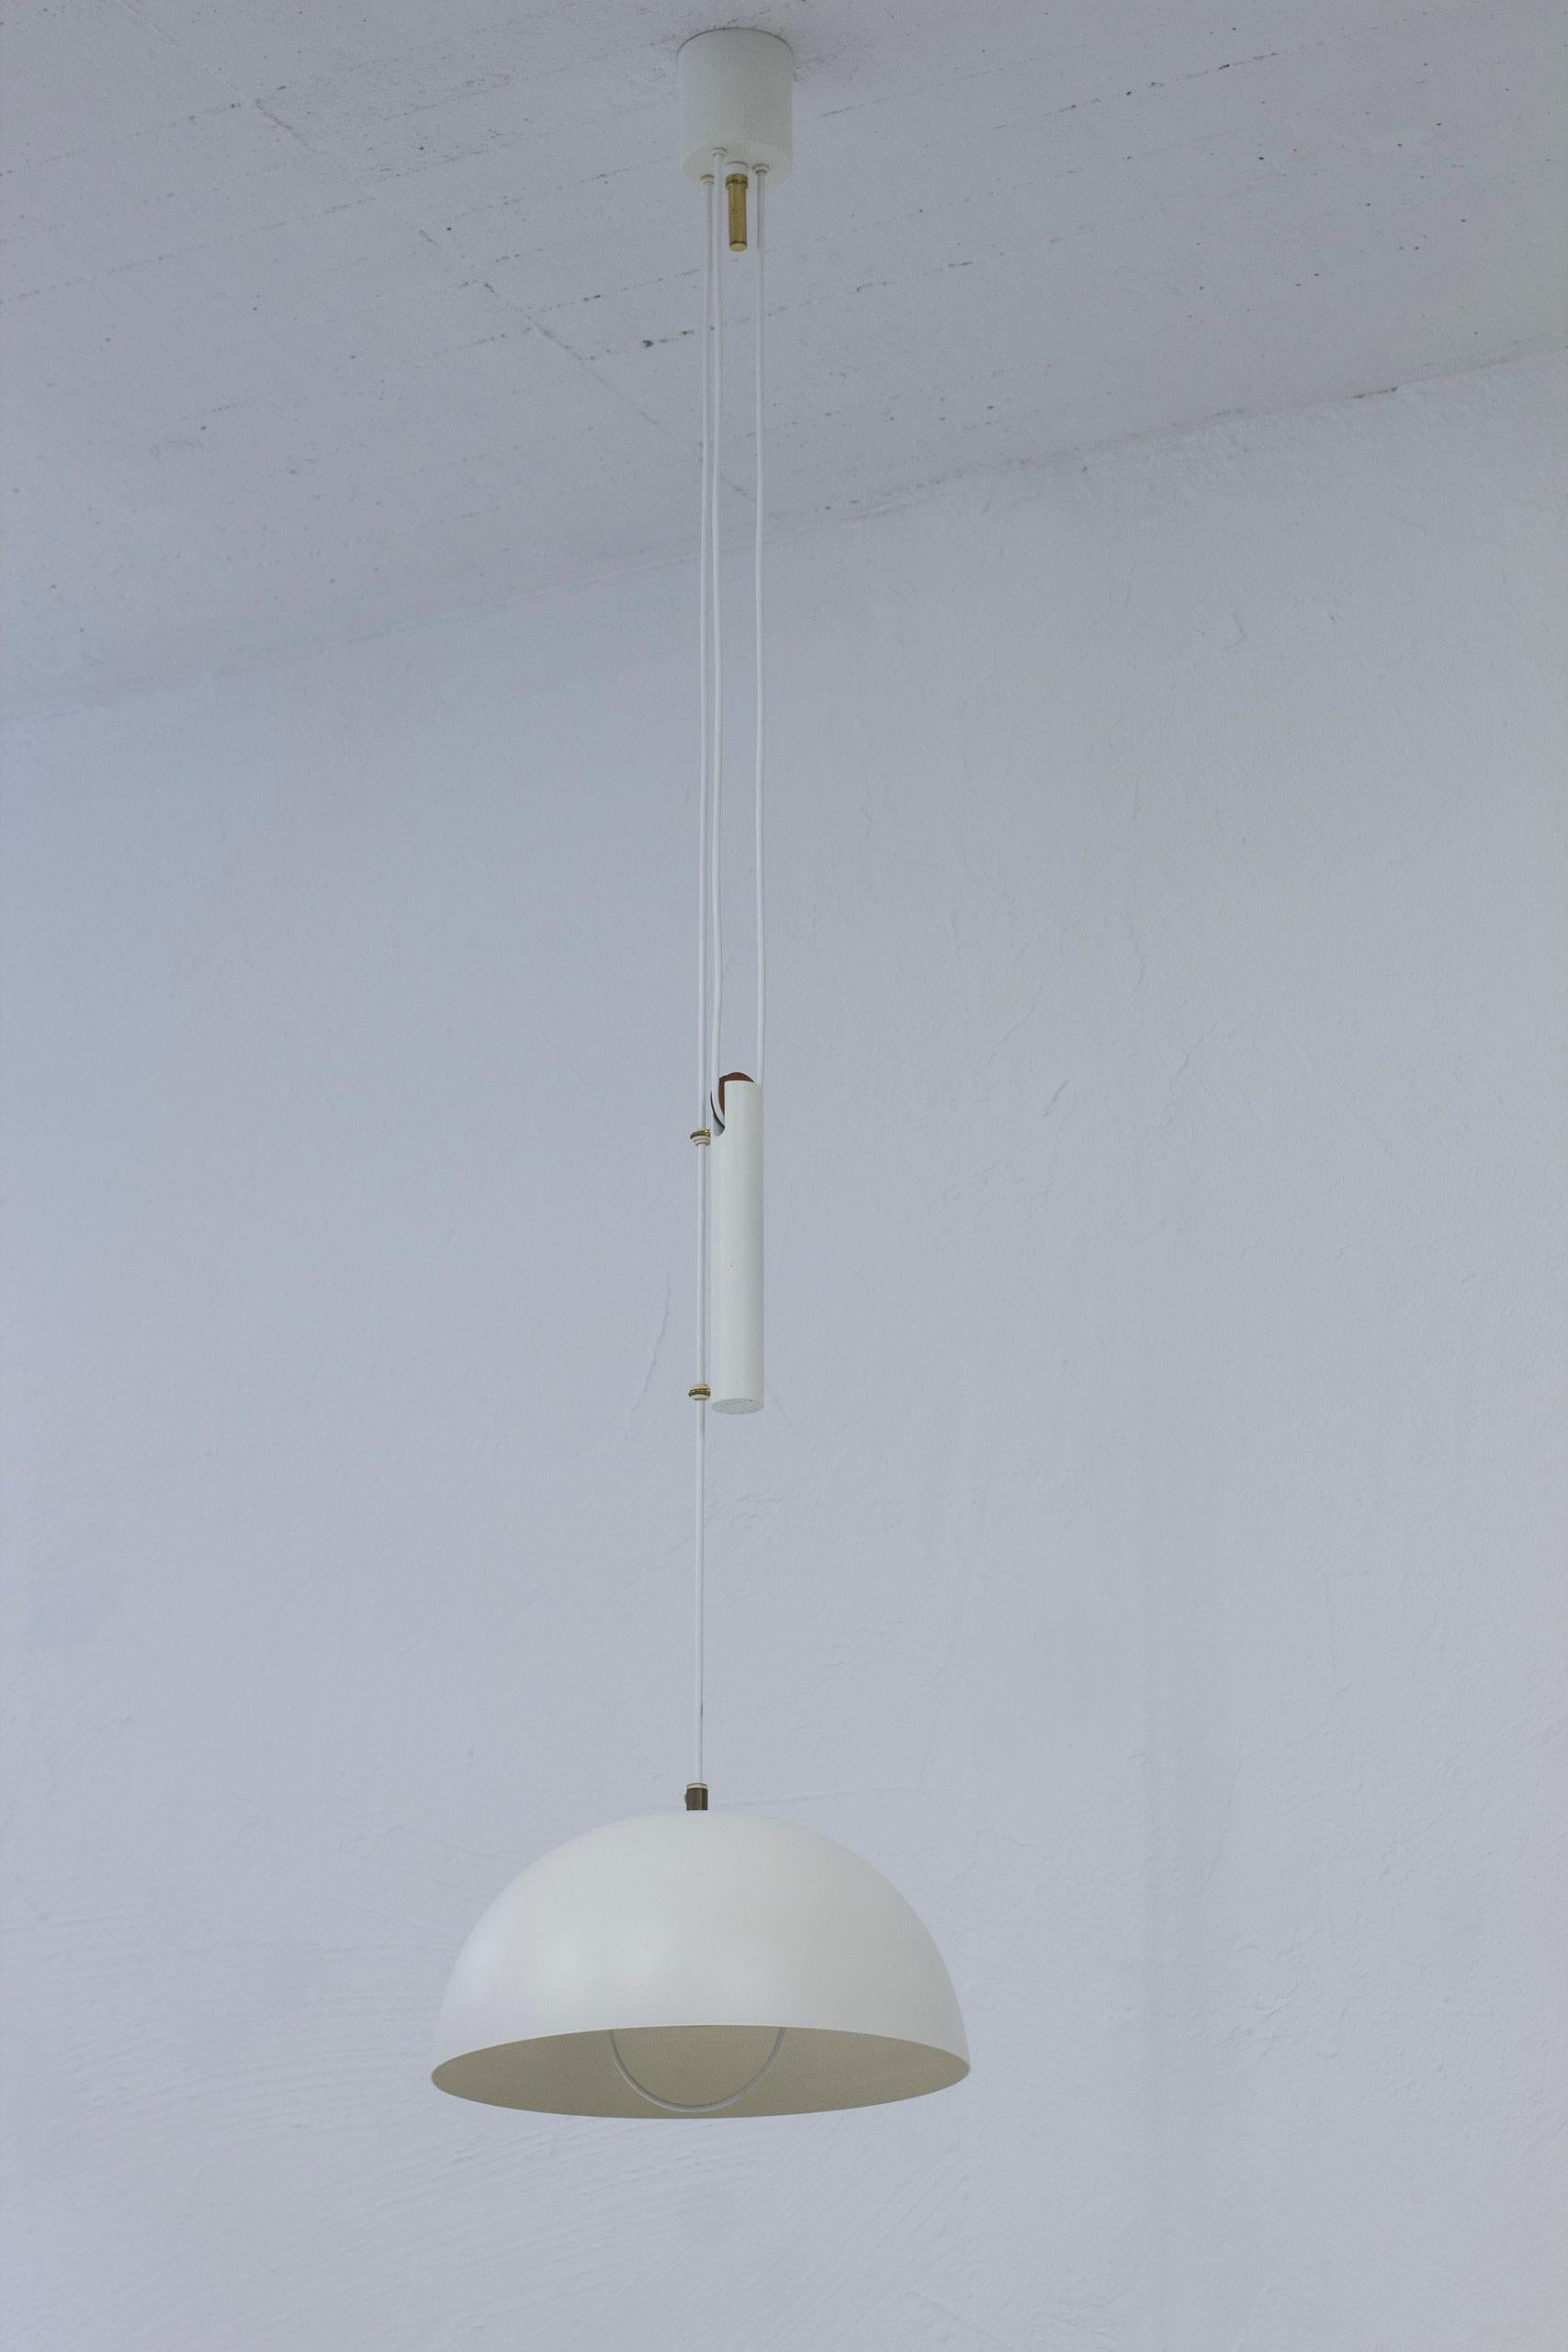 Mid-20th Century Pendant Lamps Attributed to Hans-Agne Jakobsson, Karlskron Lampfabrik, 1950s For Sale